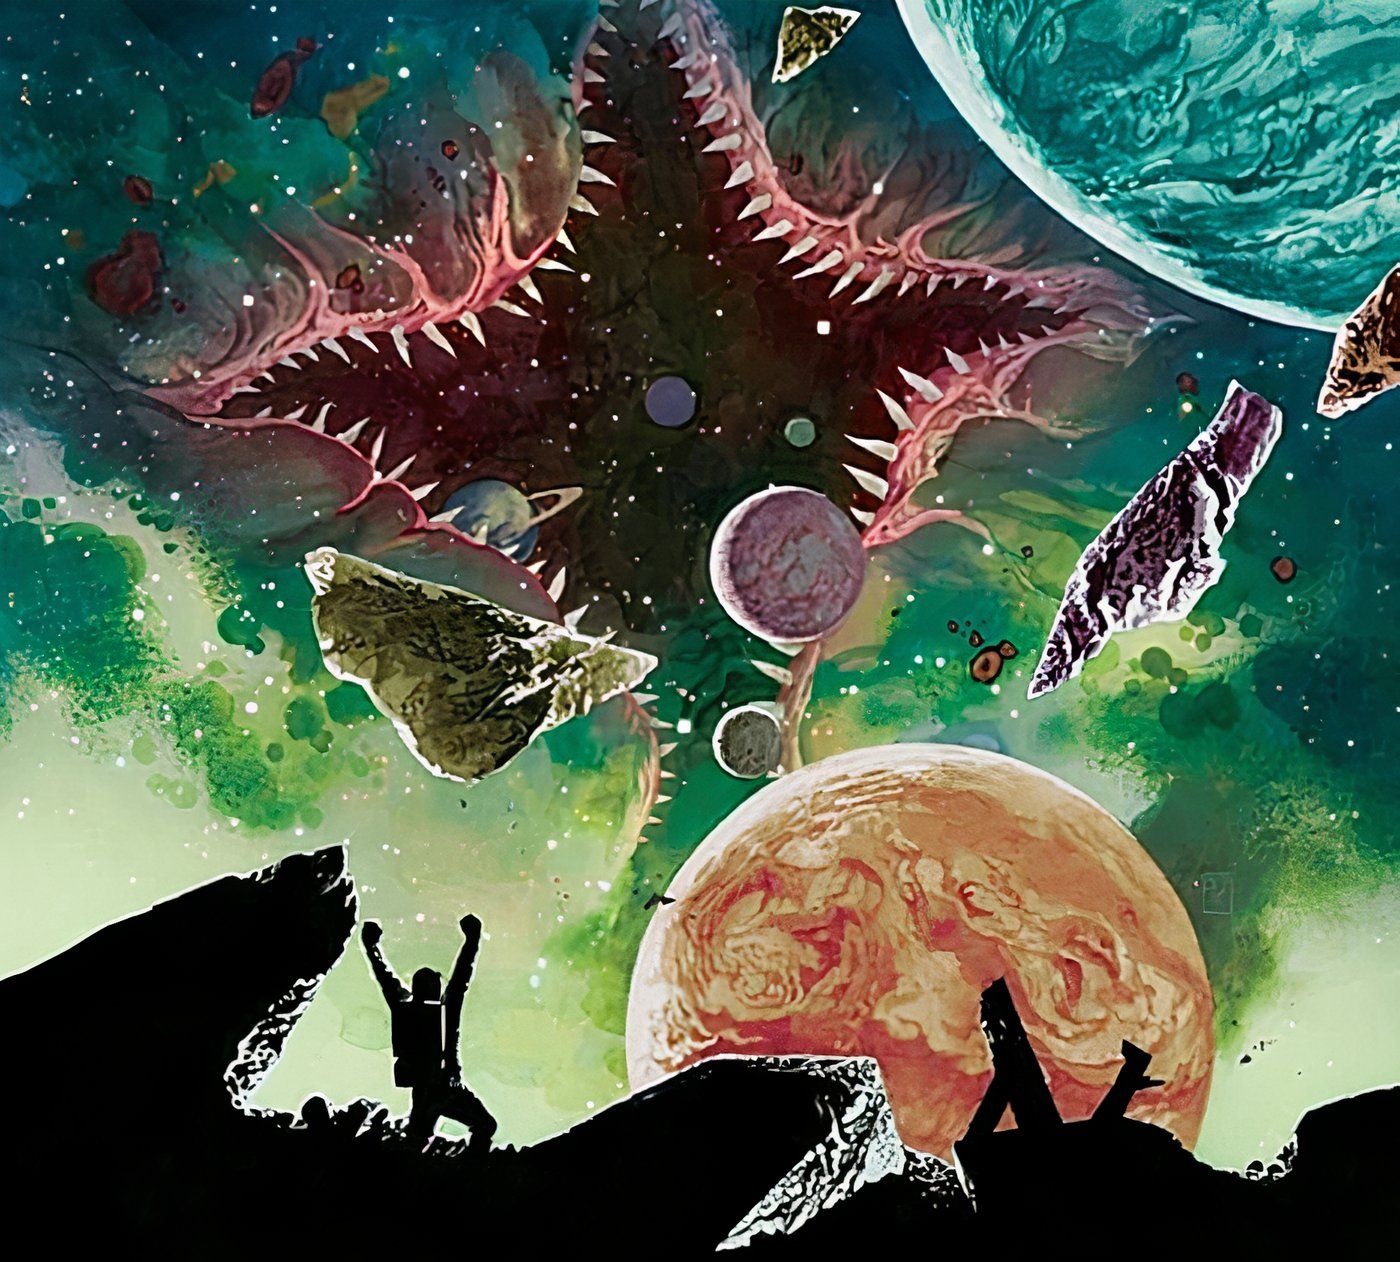 An astronaut stares at the sky above him with a space-monster looming overhead from this artwork from Oni Press's (EC Comics) Cruel Universe 1